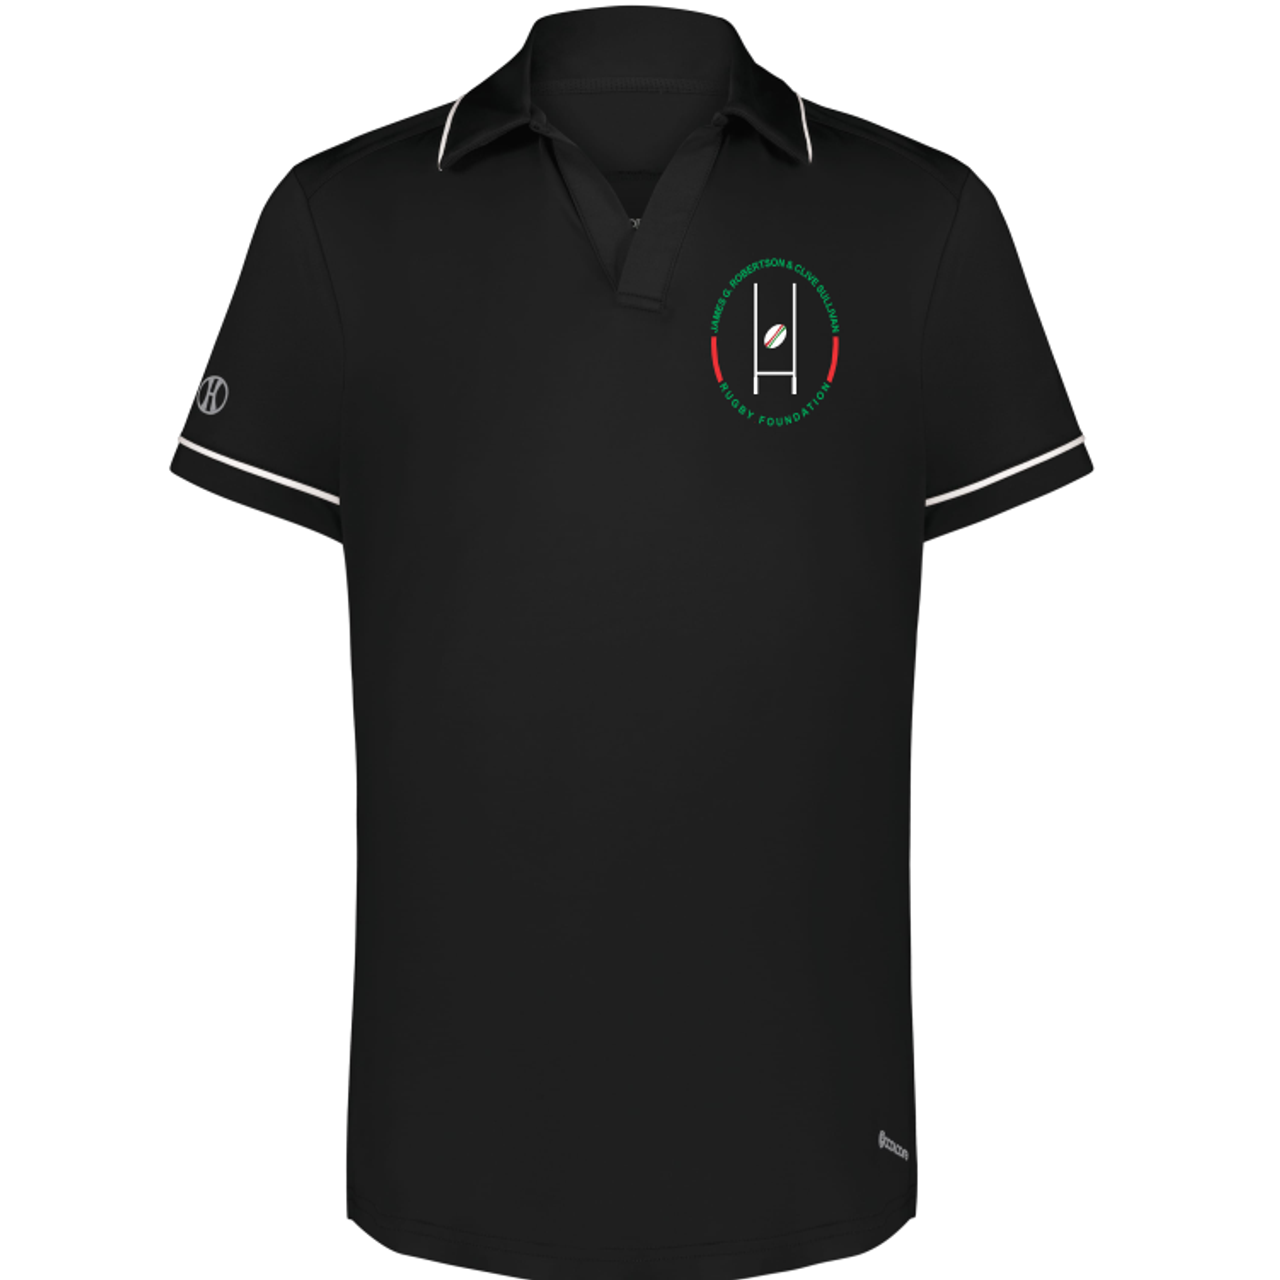 HBCU Rugby Performance Polo